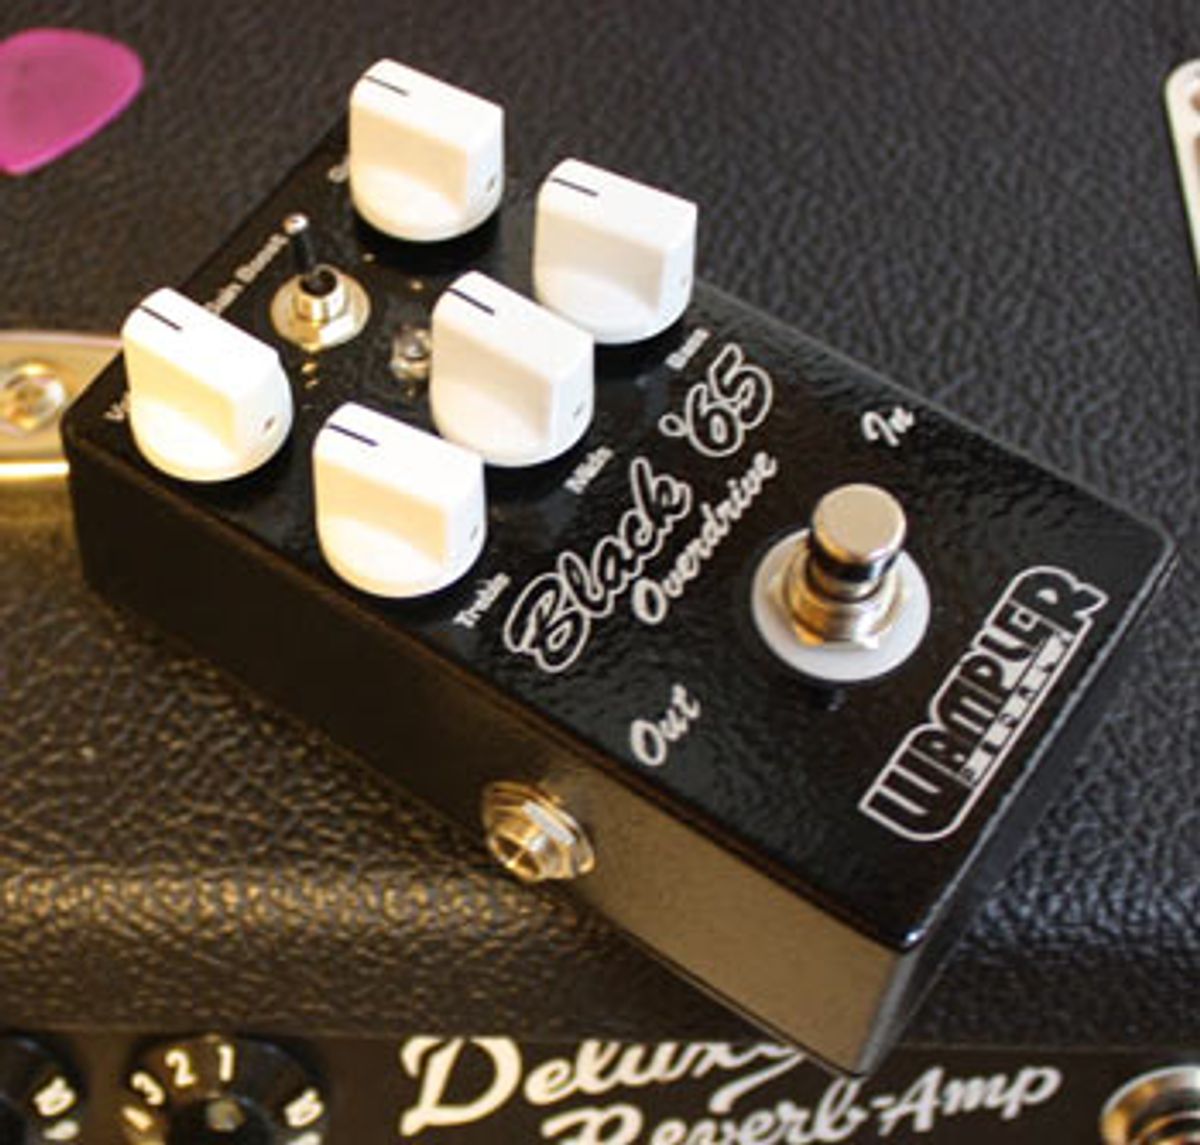 Wampler Pedals Releases Black '65 Overdrive Pedal